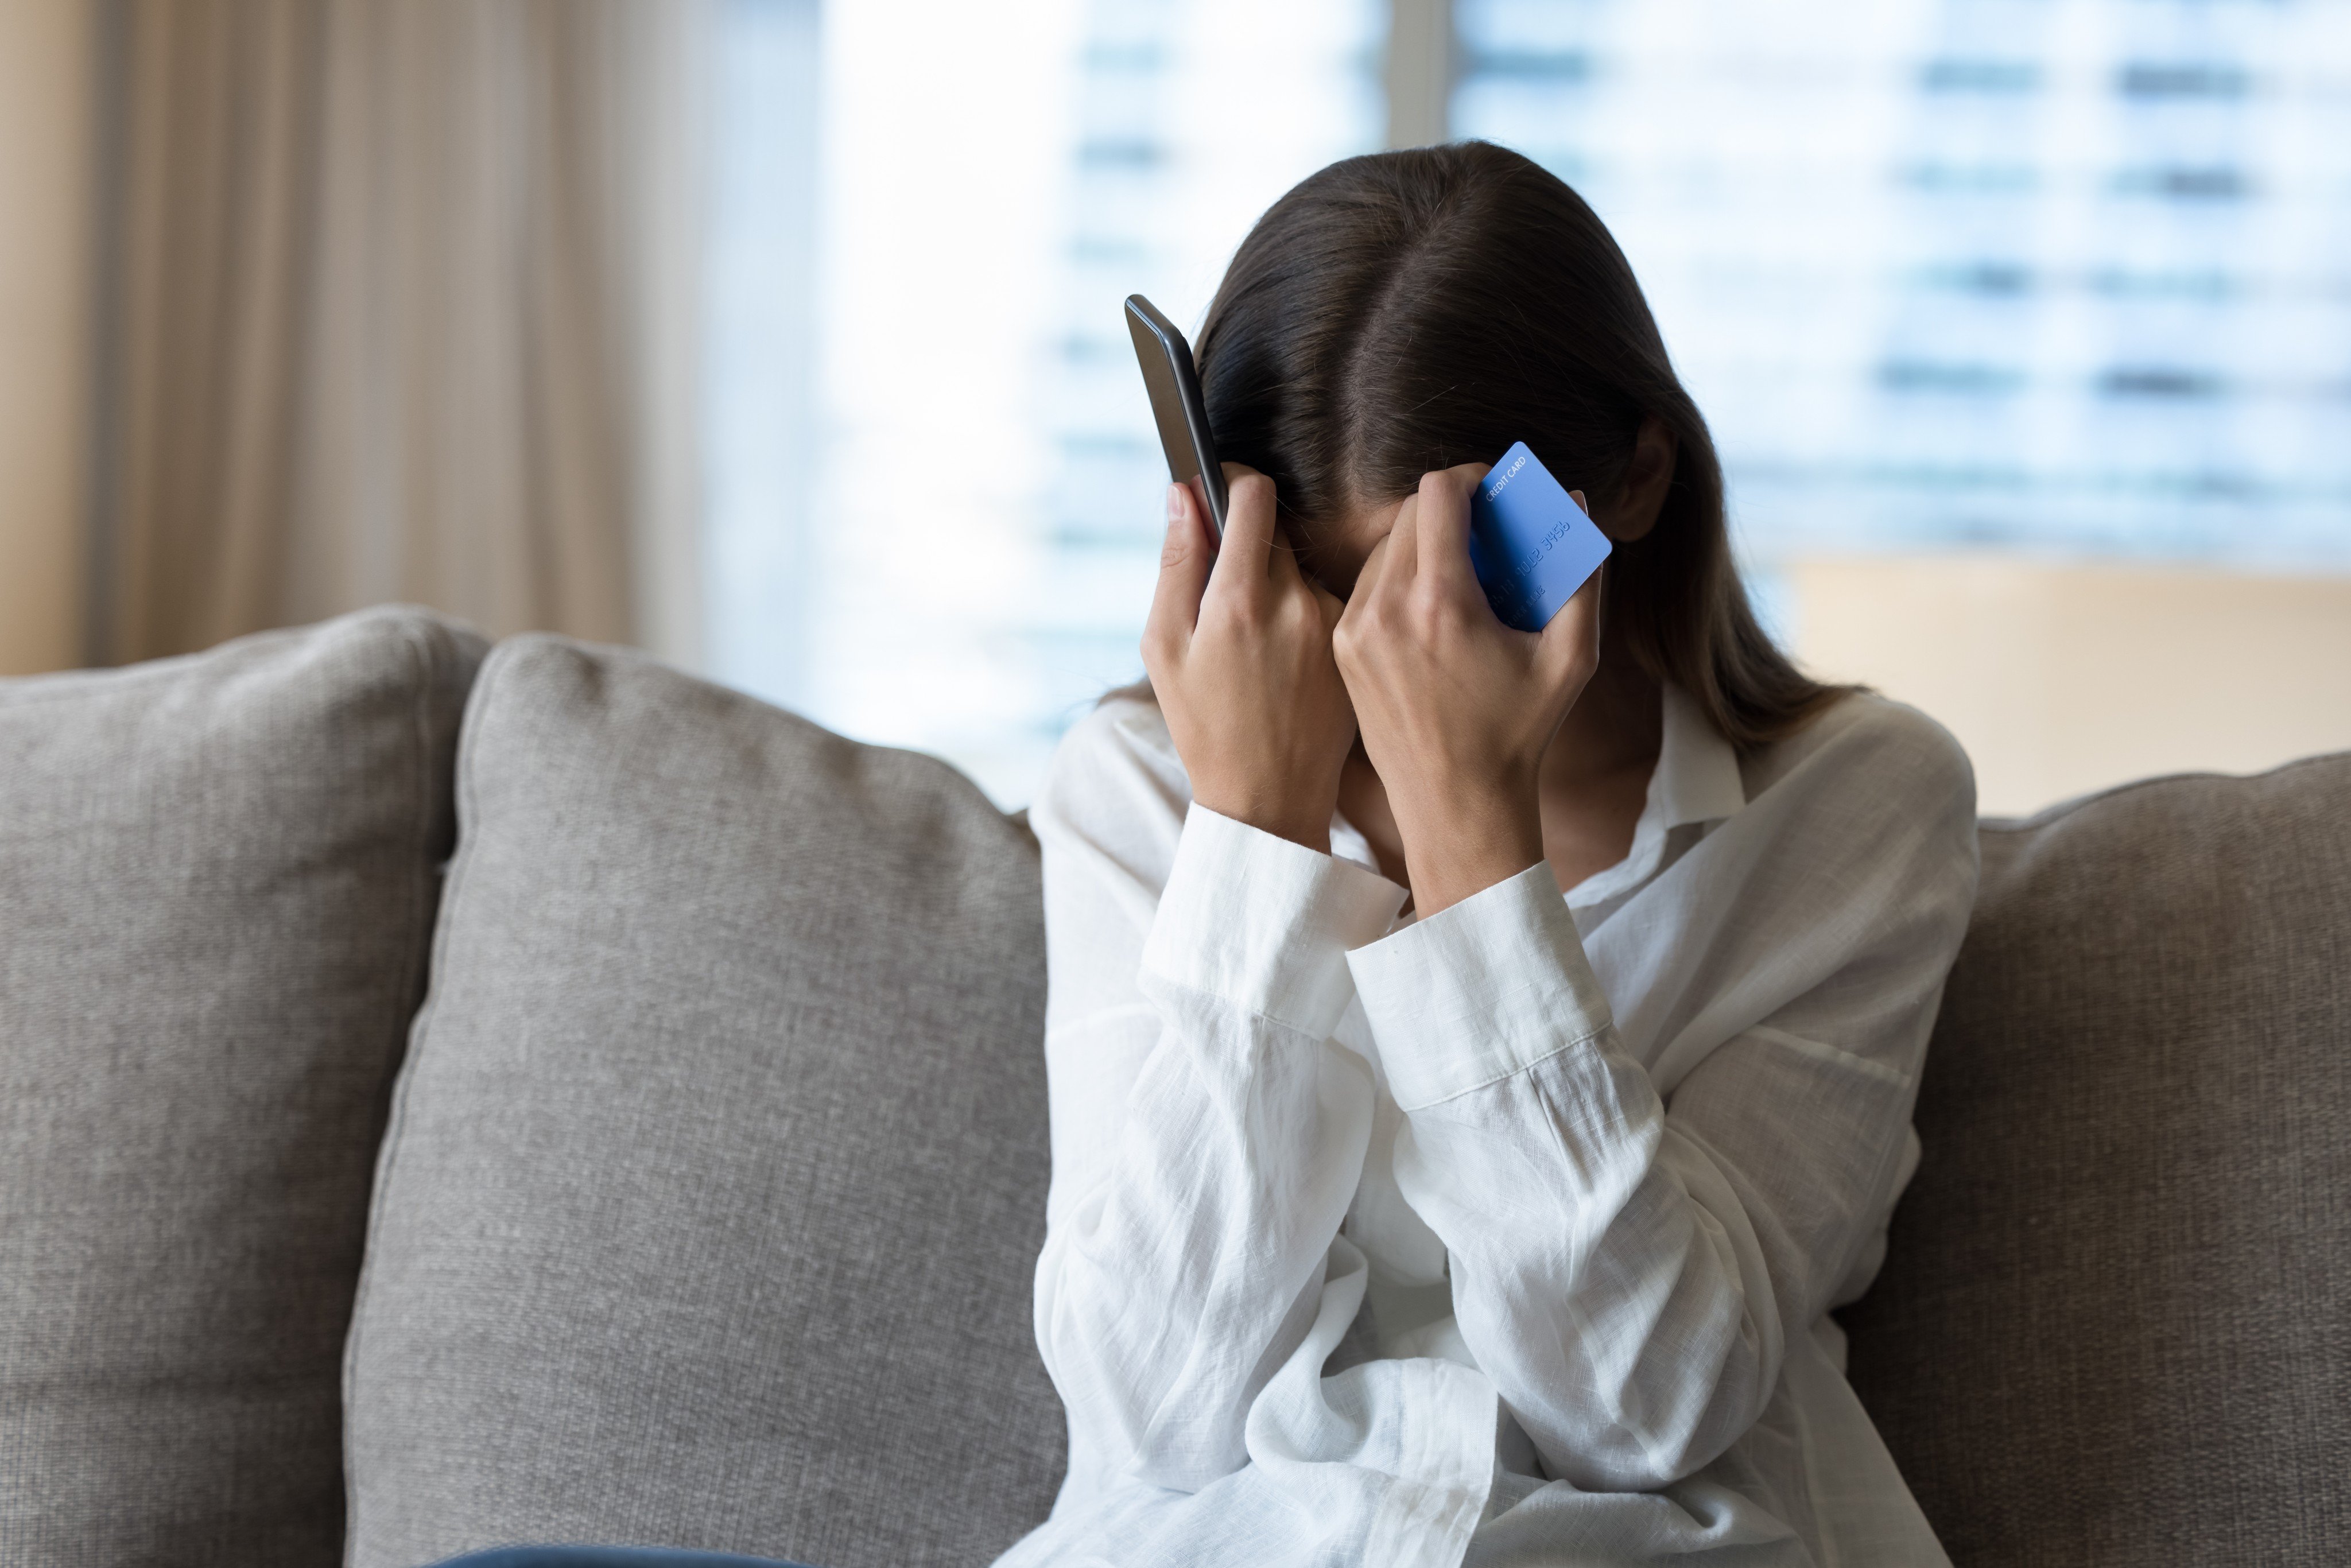 For many scam victims, frustration starts building during the long wait to get through to a bank’s customer service hotline, after the scam is discovered. The process of fund recovery is often arduous, lengthy and fraught with disappointment. Photo: Shutterstock